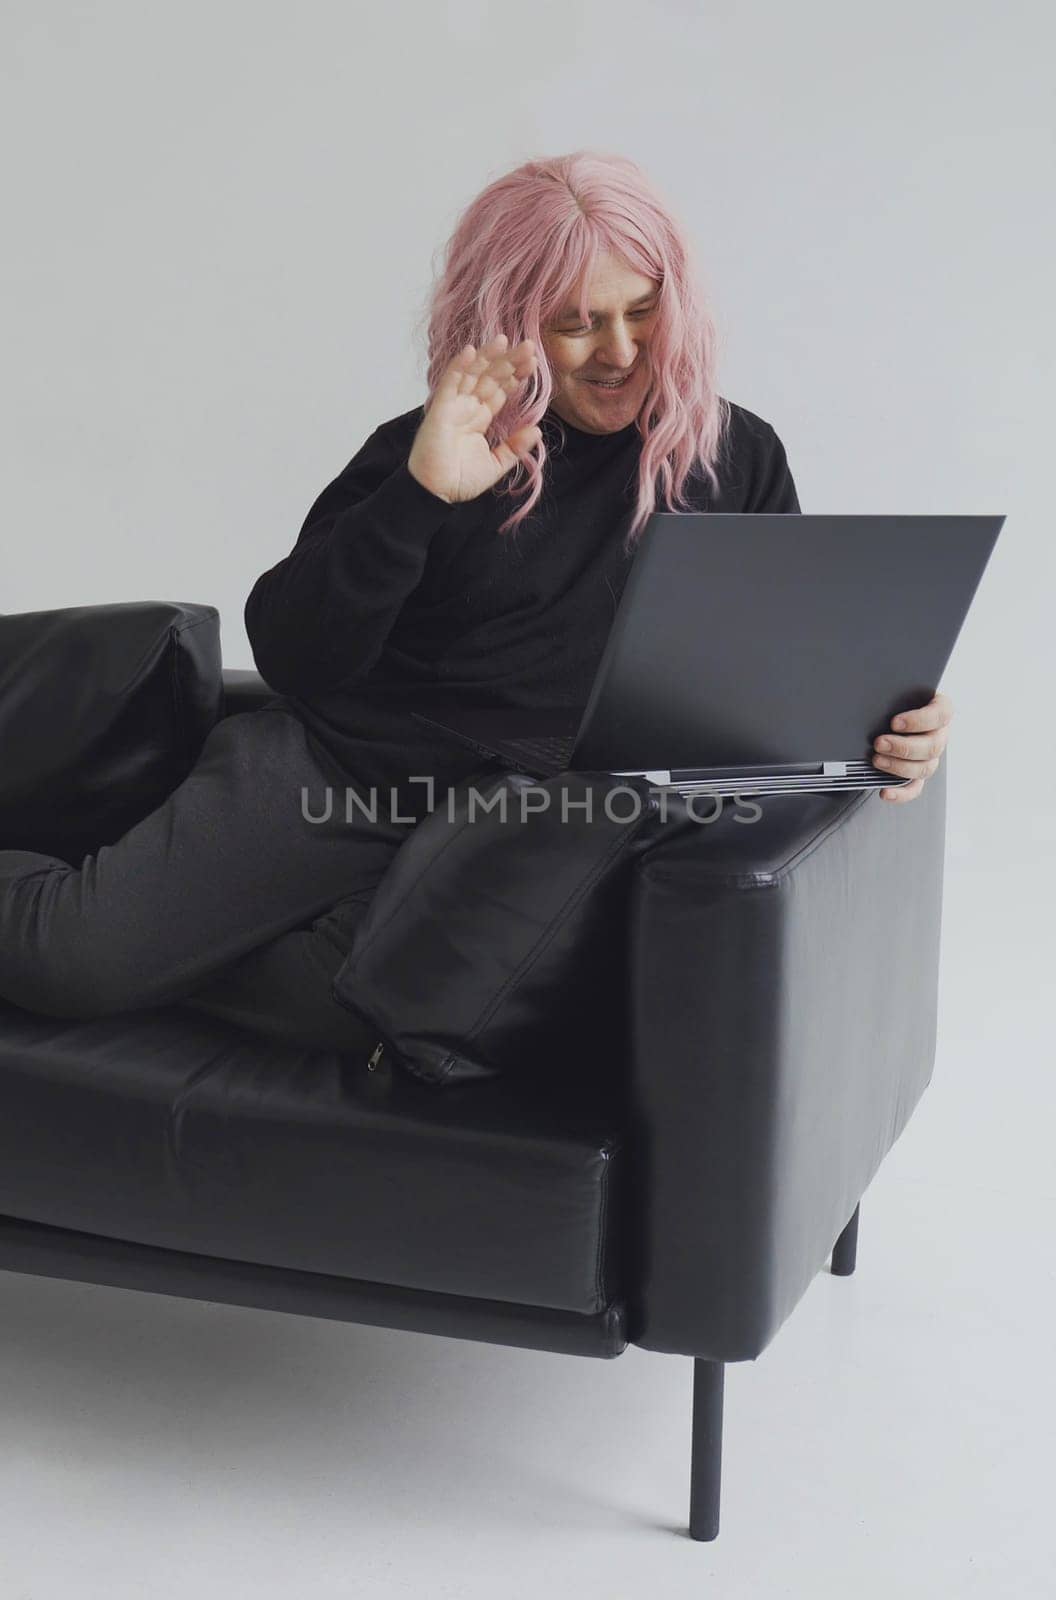 A man in a pink wig, sits on a sofa, communicates via video link on a laptop. by Sd28DimoN_1976